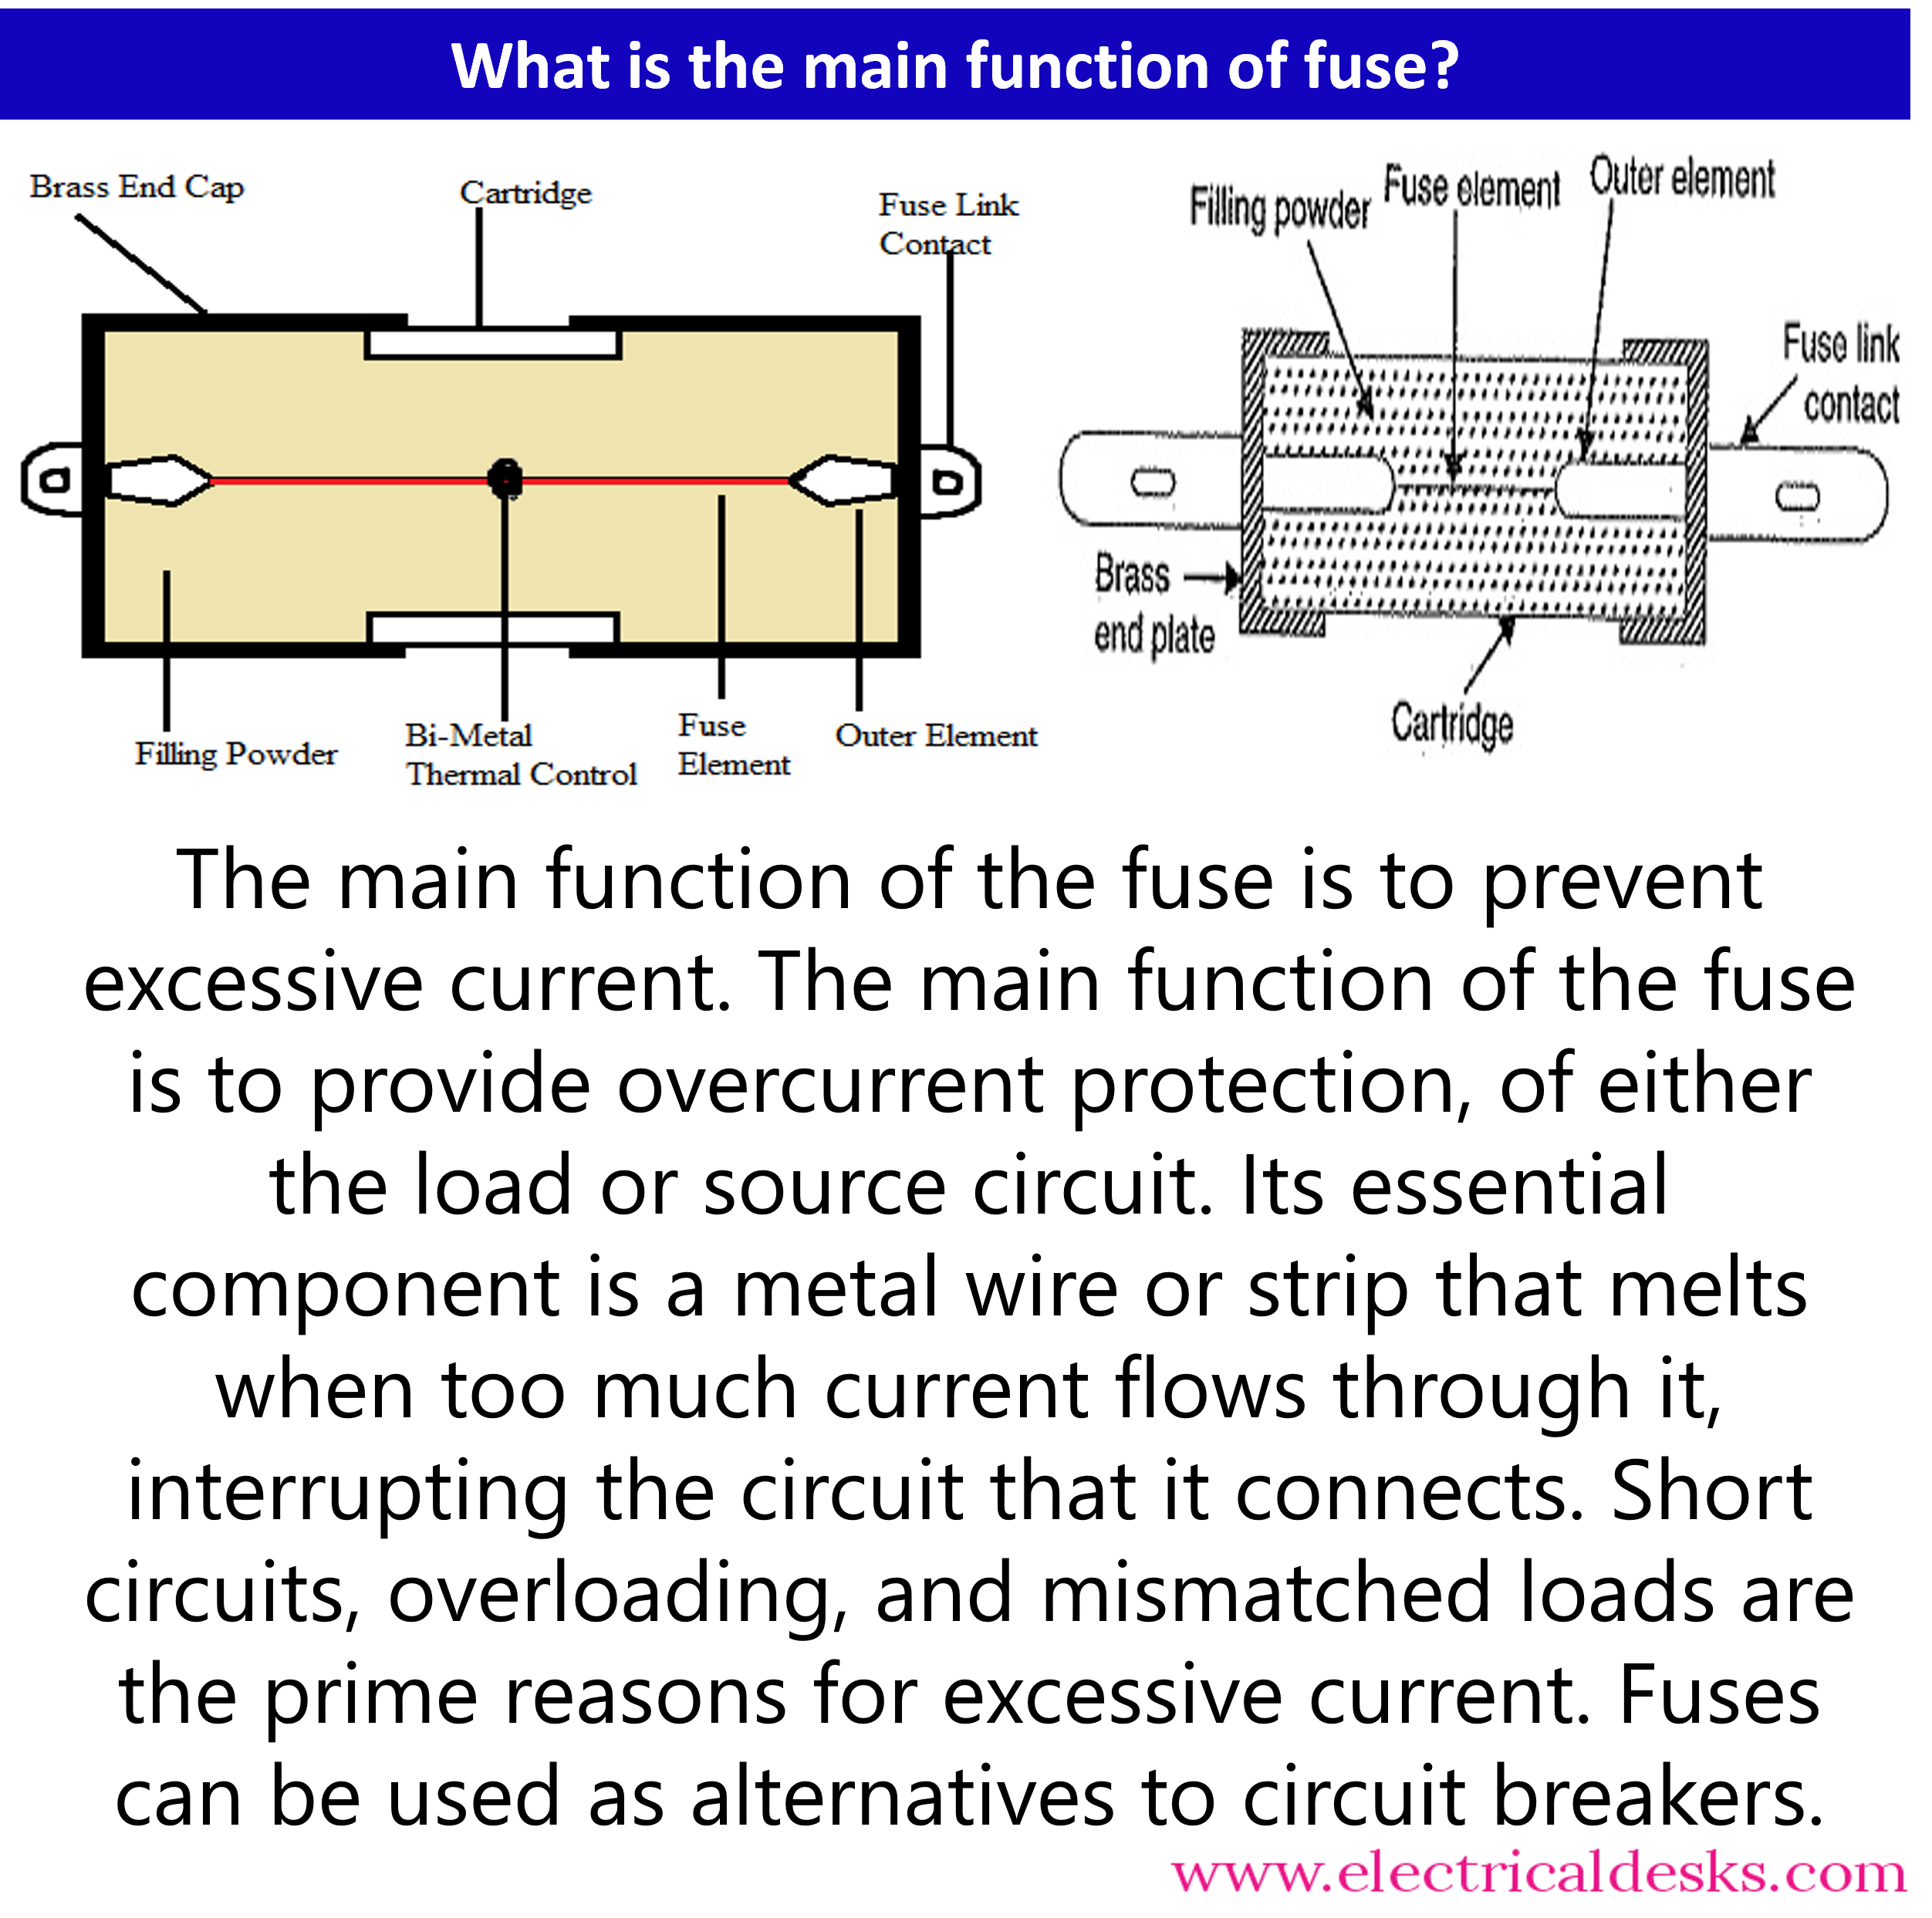 How Does A Fuse Work?